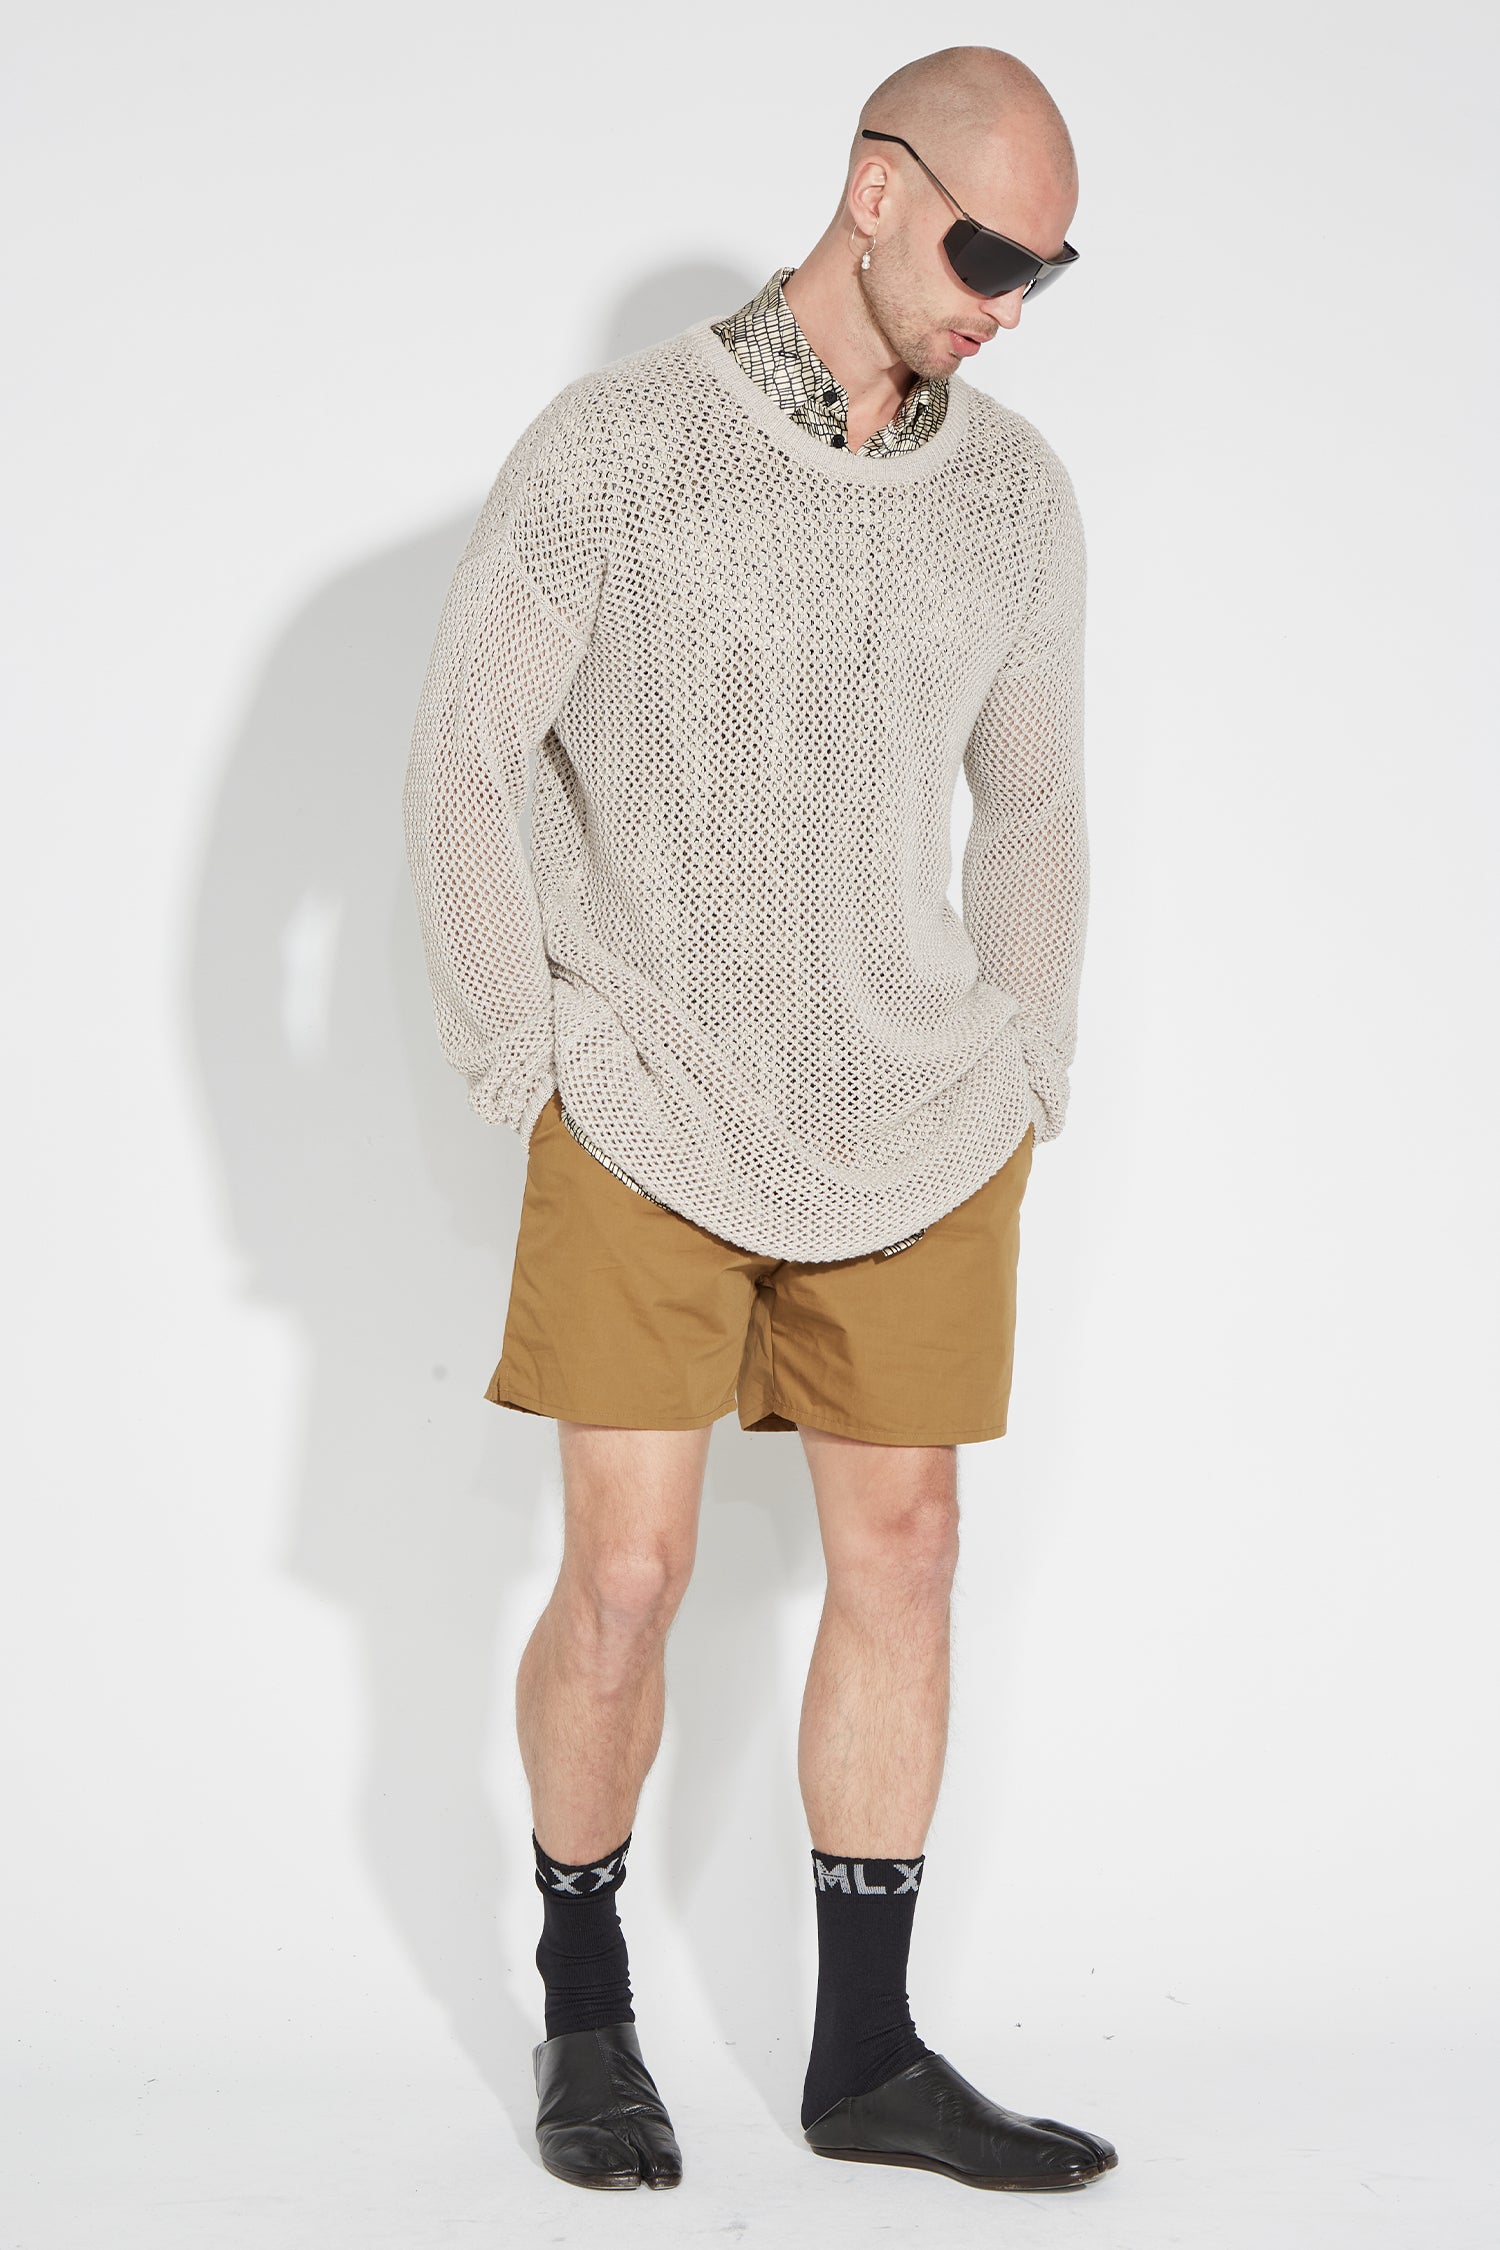 PULLOVER LONG IN SAND, S23